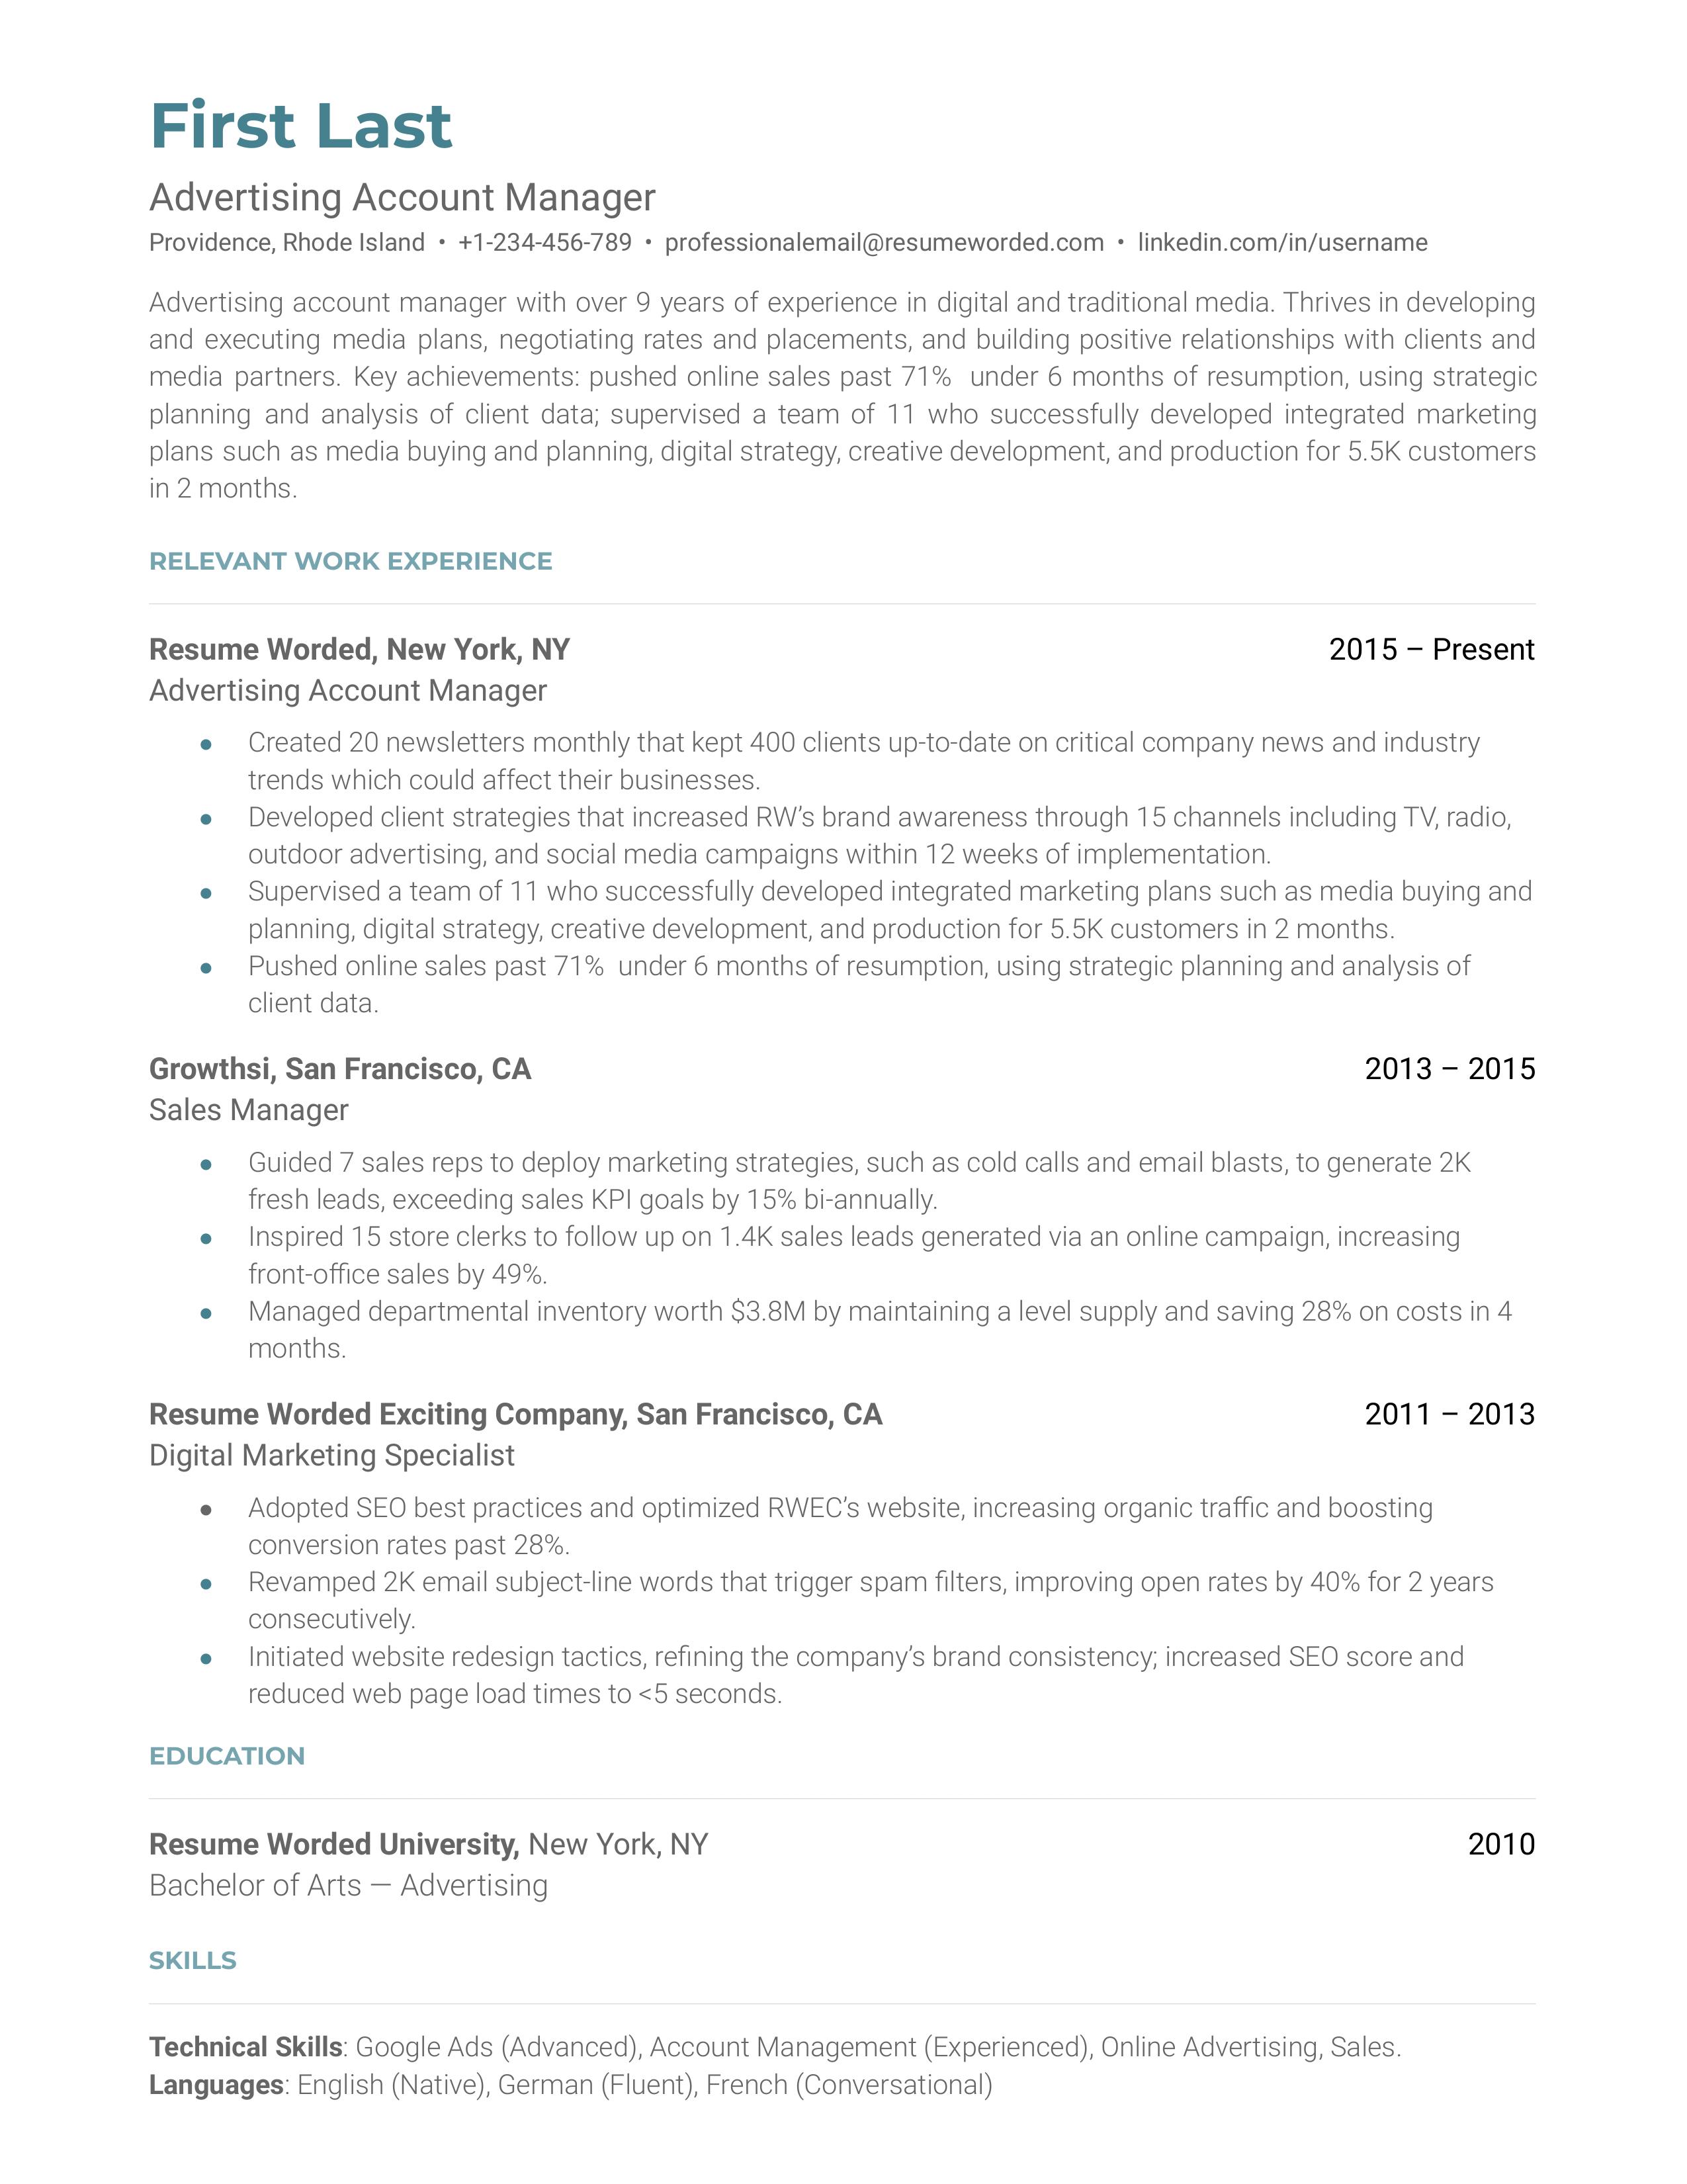 Advertising Account Manager Resume Template + Example